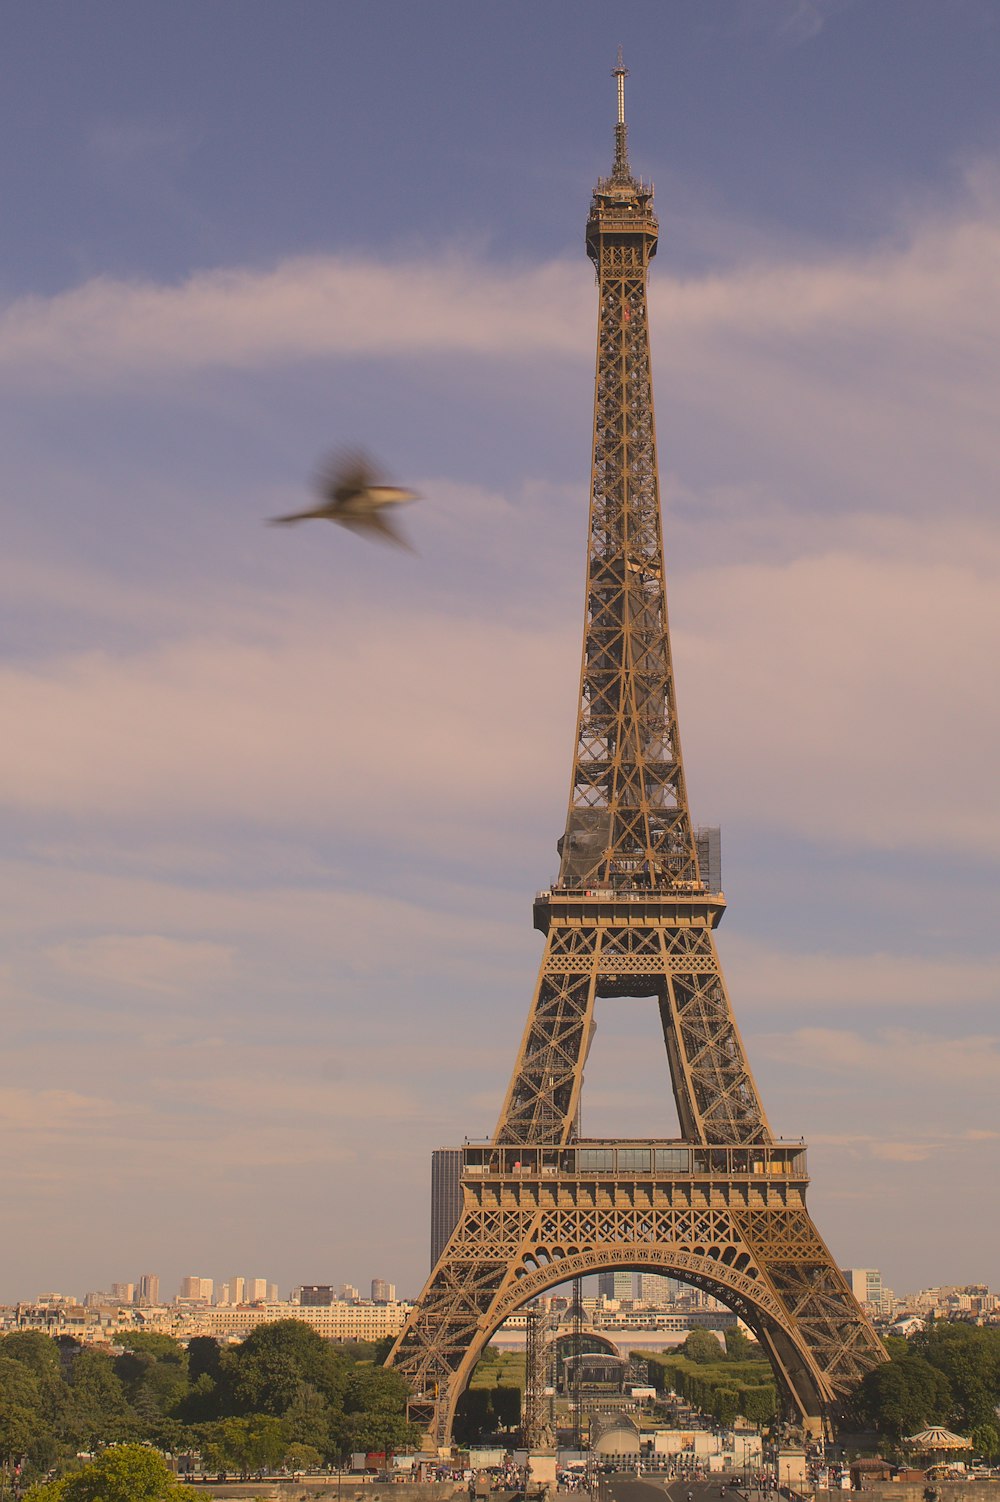 a bird flying in front of the eiffel tower with Eiffel Tower in the background